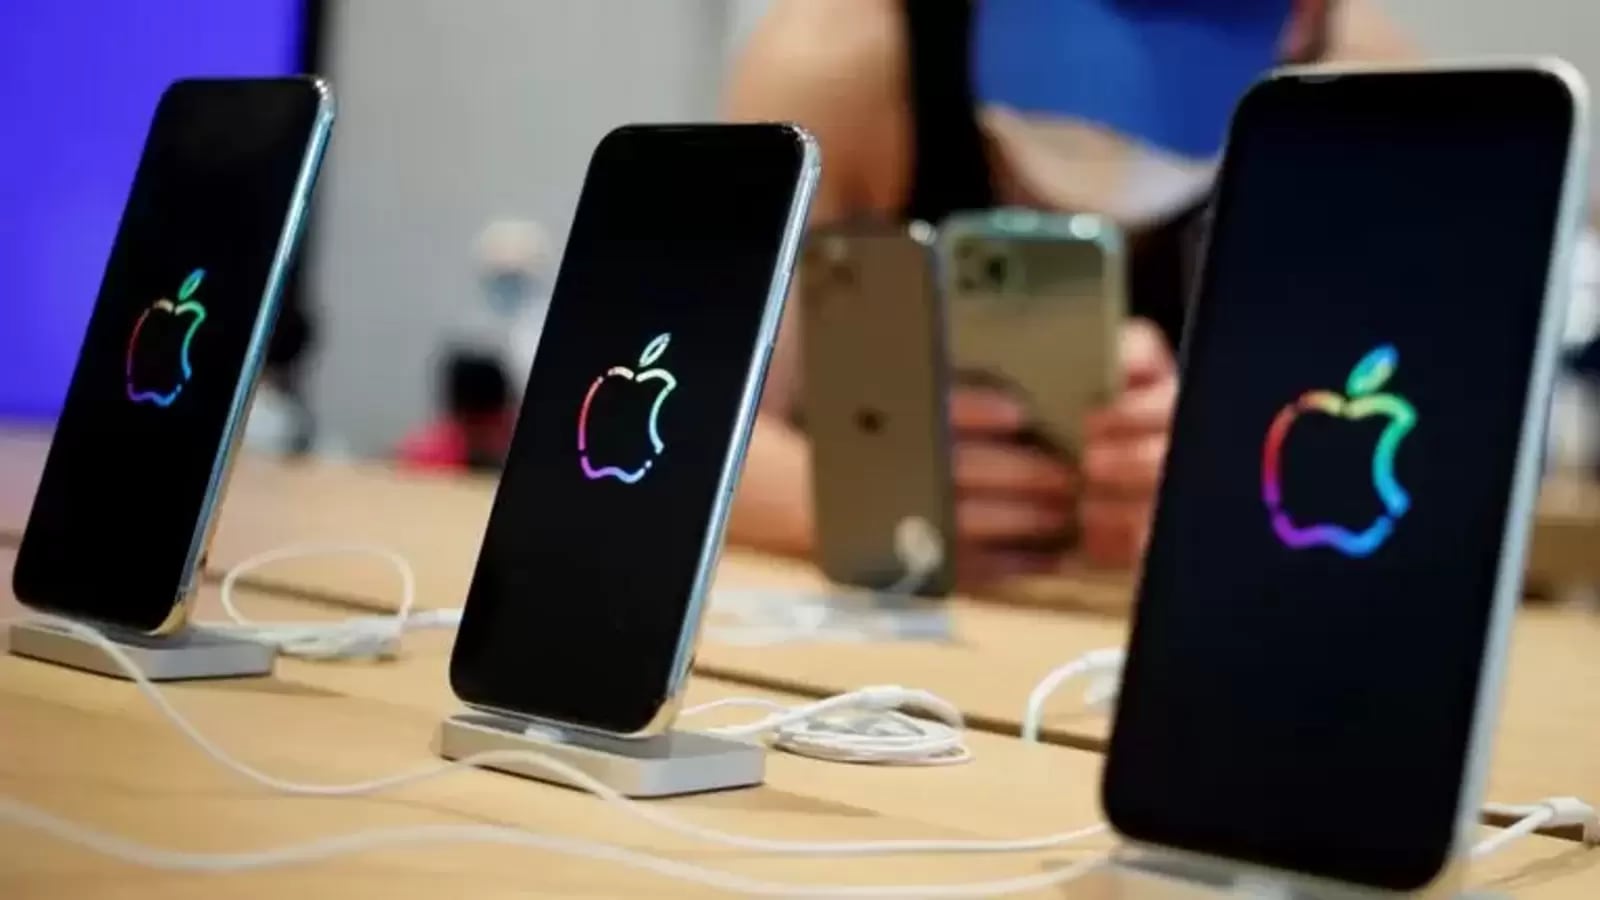 Apple iPhone 13, iPhone 12 price cut: Amazon vs Flipkart, know where to get the best deal | Mobile News